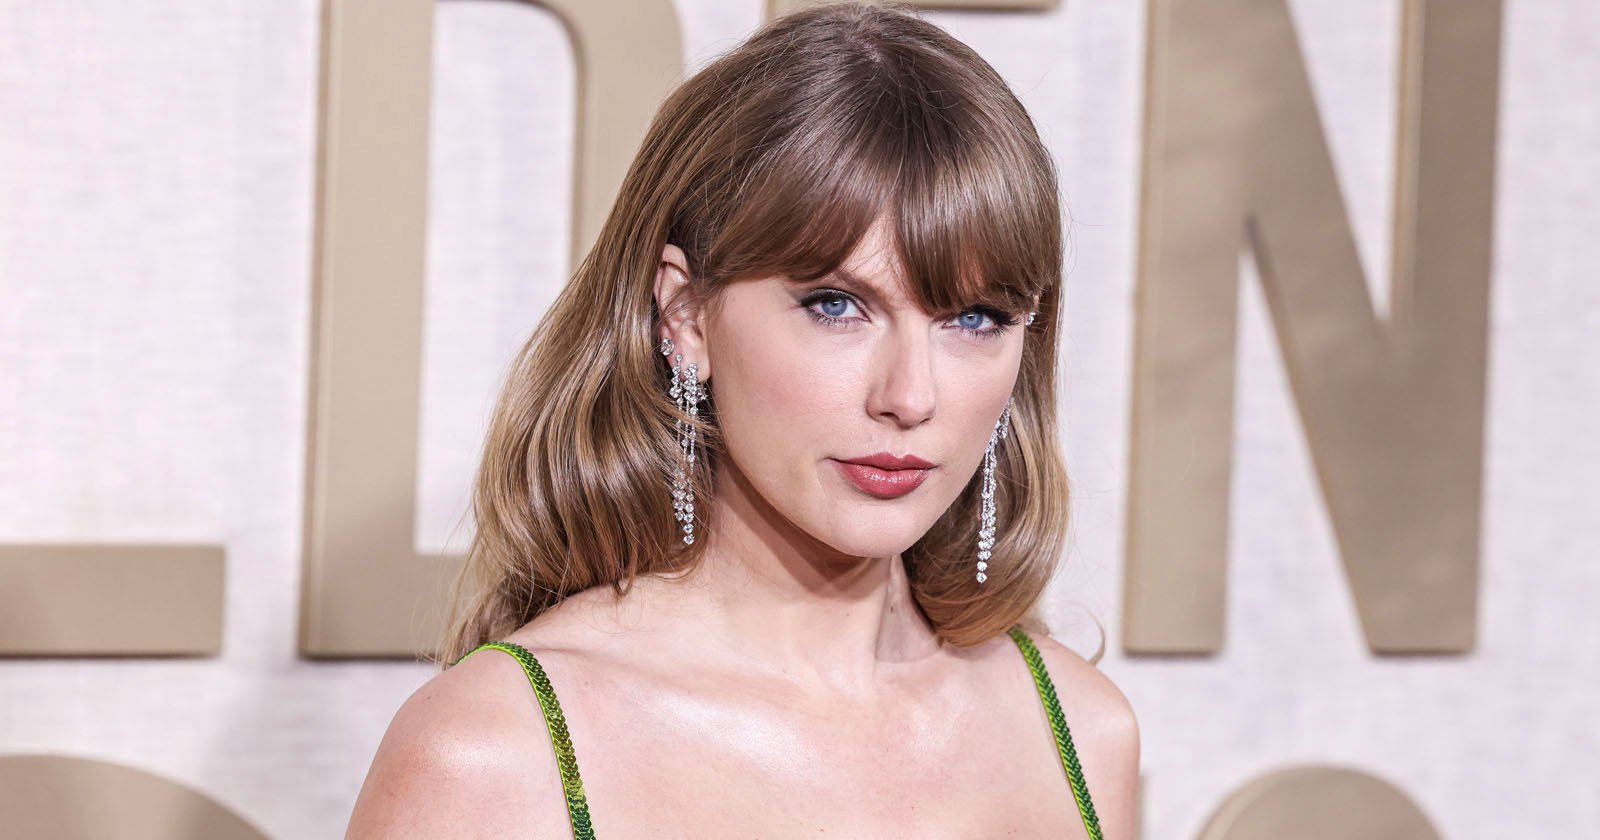  taylor swift dad accused assaulting photographer after her 